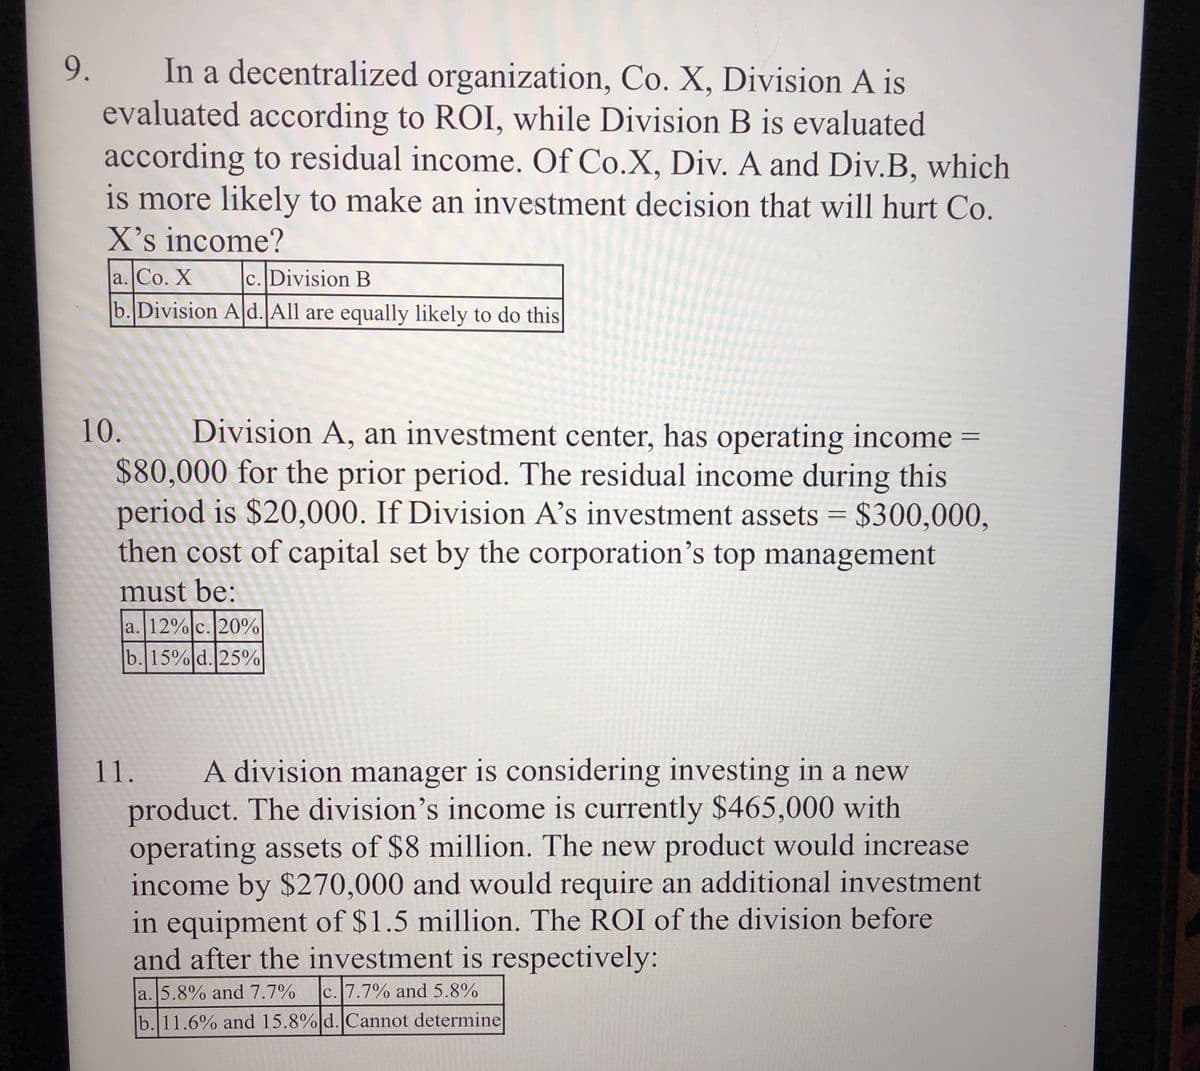 In a decentralized organization, Co. X, Division A is
evaluated according to ROI, while Division B is evaluated
according to residual income. Of Co.X, Div. A and Div.B, which
is more likely to make an investment decision that will hurt Co.
X's income?
a. Co. X
b. Division A d. All are equally likely to do this
9.
c. Division B
10. Division A, an investment center, has operating income =
$80,000 for the prior period. The residual income during this
period is $20,000. If Division A’s investment assets = $300,000,
then cost of capital set by the corporation's top management
must be:
a. 12%|c.20%
b. 15% d. 25%
11.
A division manager is considering investing in a new
product. The division's income is currently $465,000 with
operating assets of $8 million. The new product would increase
income by $270,000 and would require an additional investment
in equipment of $1.5 million. The ROI of the division before
and after the investment is respectively:
a. 5.8% and 7.7%
c. 7.7% and 5.8%
b. 11.6% and 15.8%|d. Cannot determine
